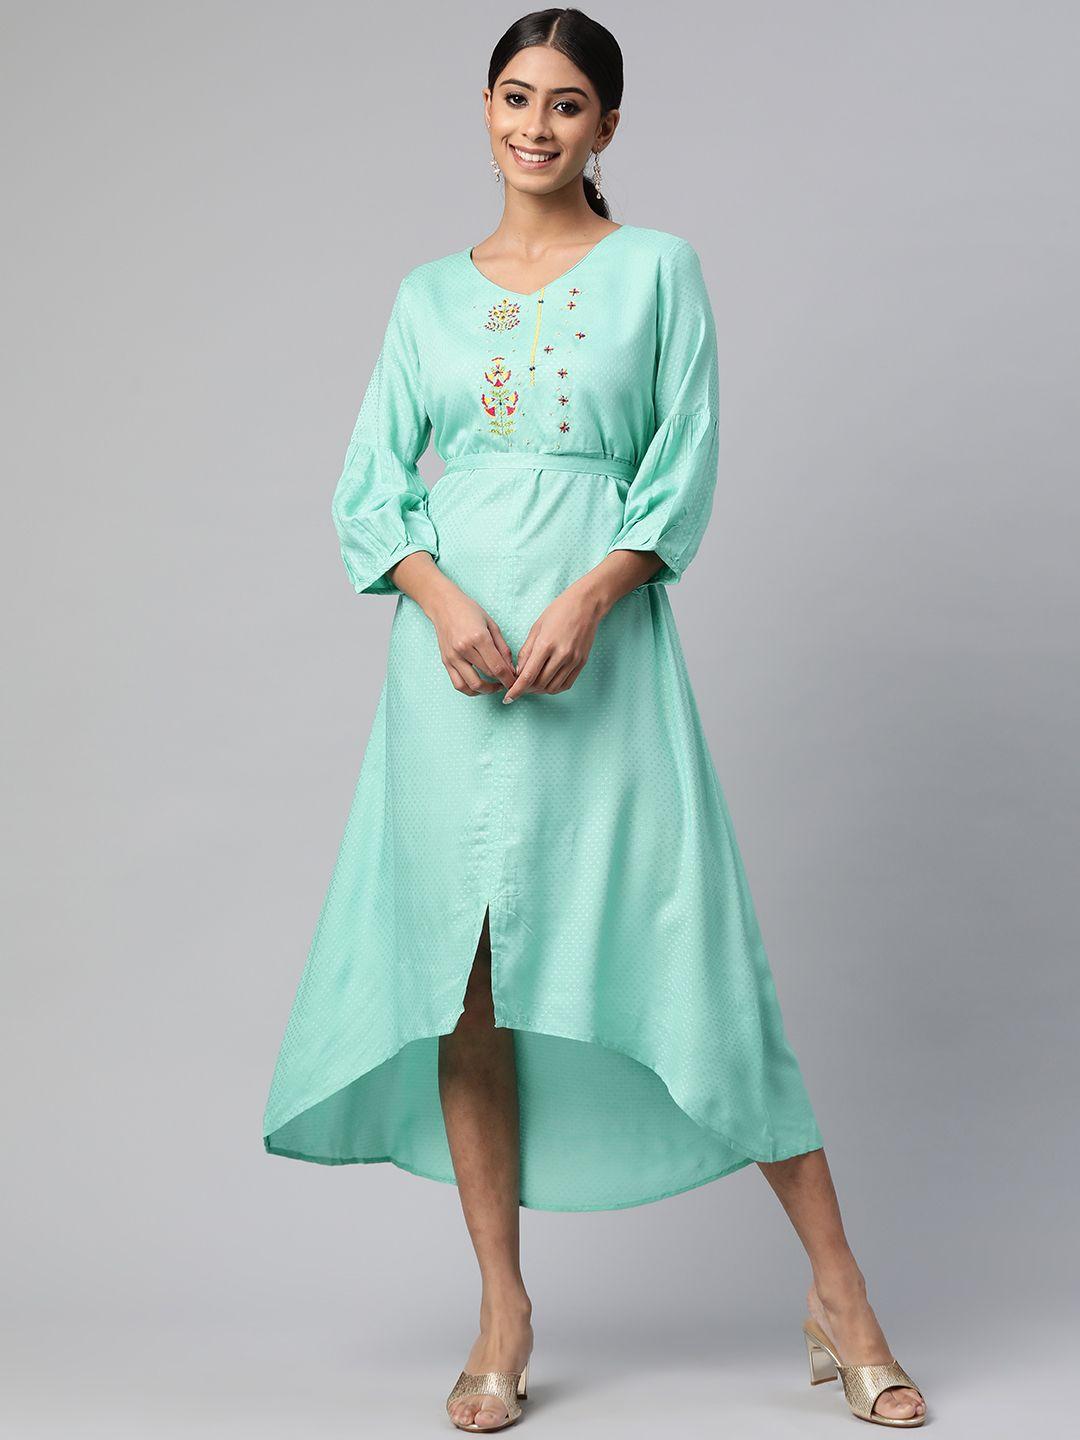 rangriti women turquoise blue & yellow embroidered a-line midi dress with a belt